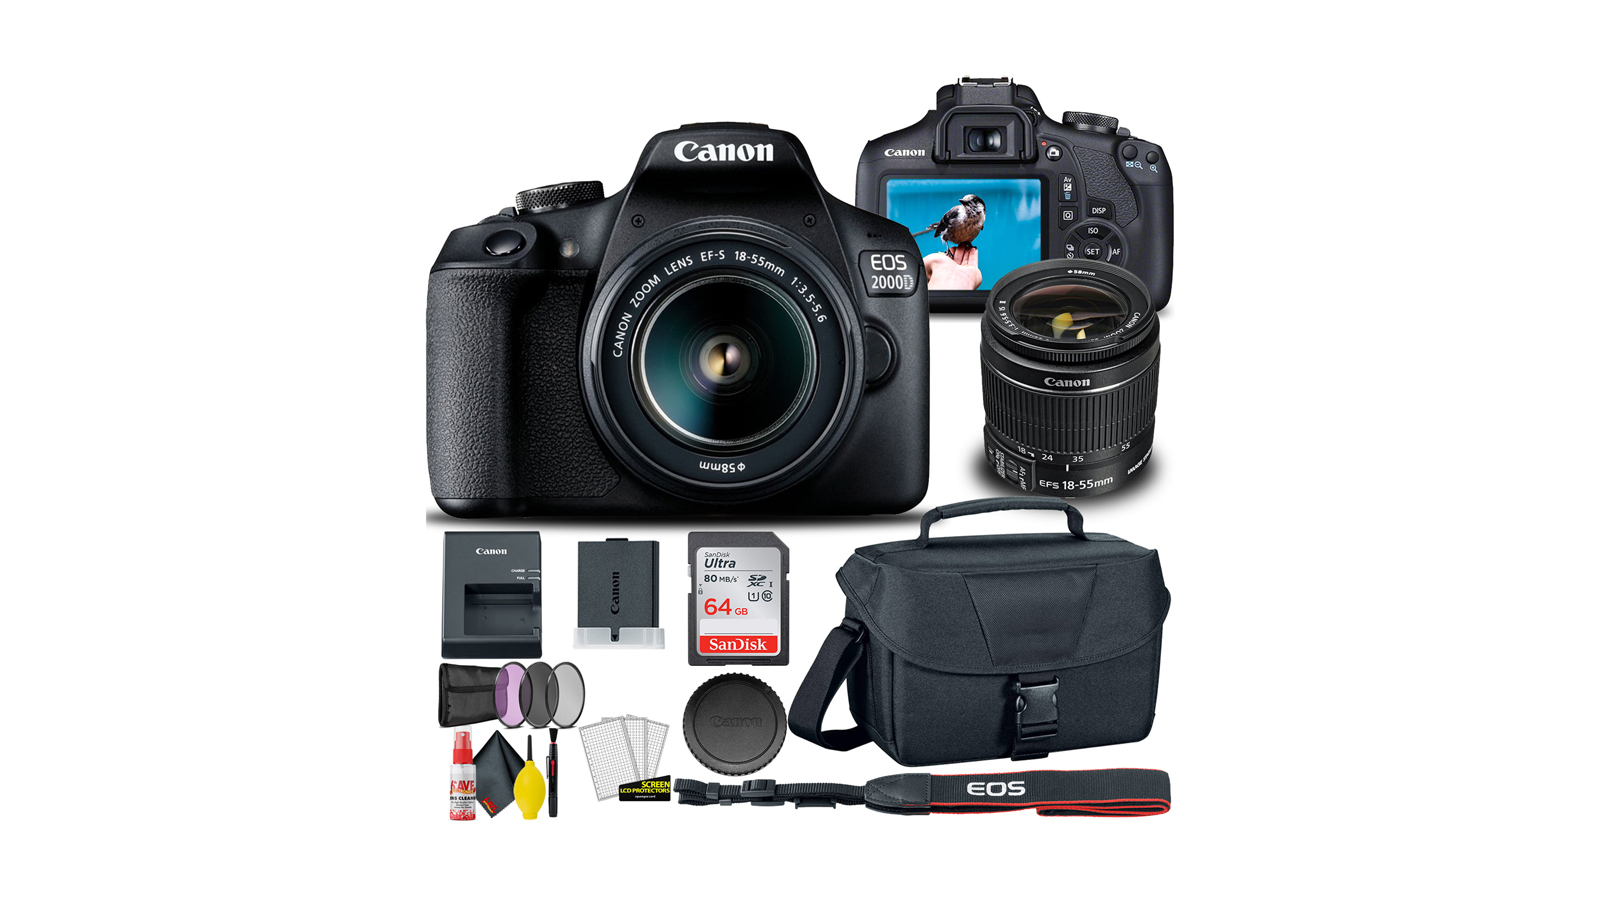 Save $50 on the Canon EOS 2000D Rebel T7 camera bundle at Walmart